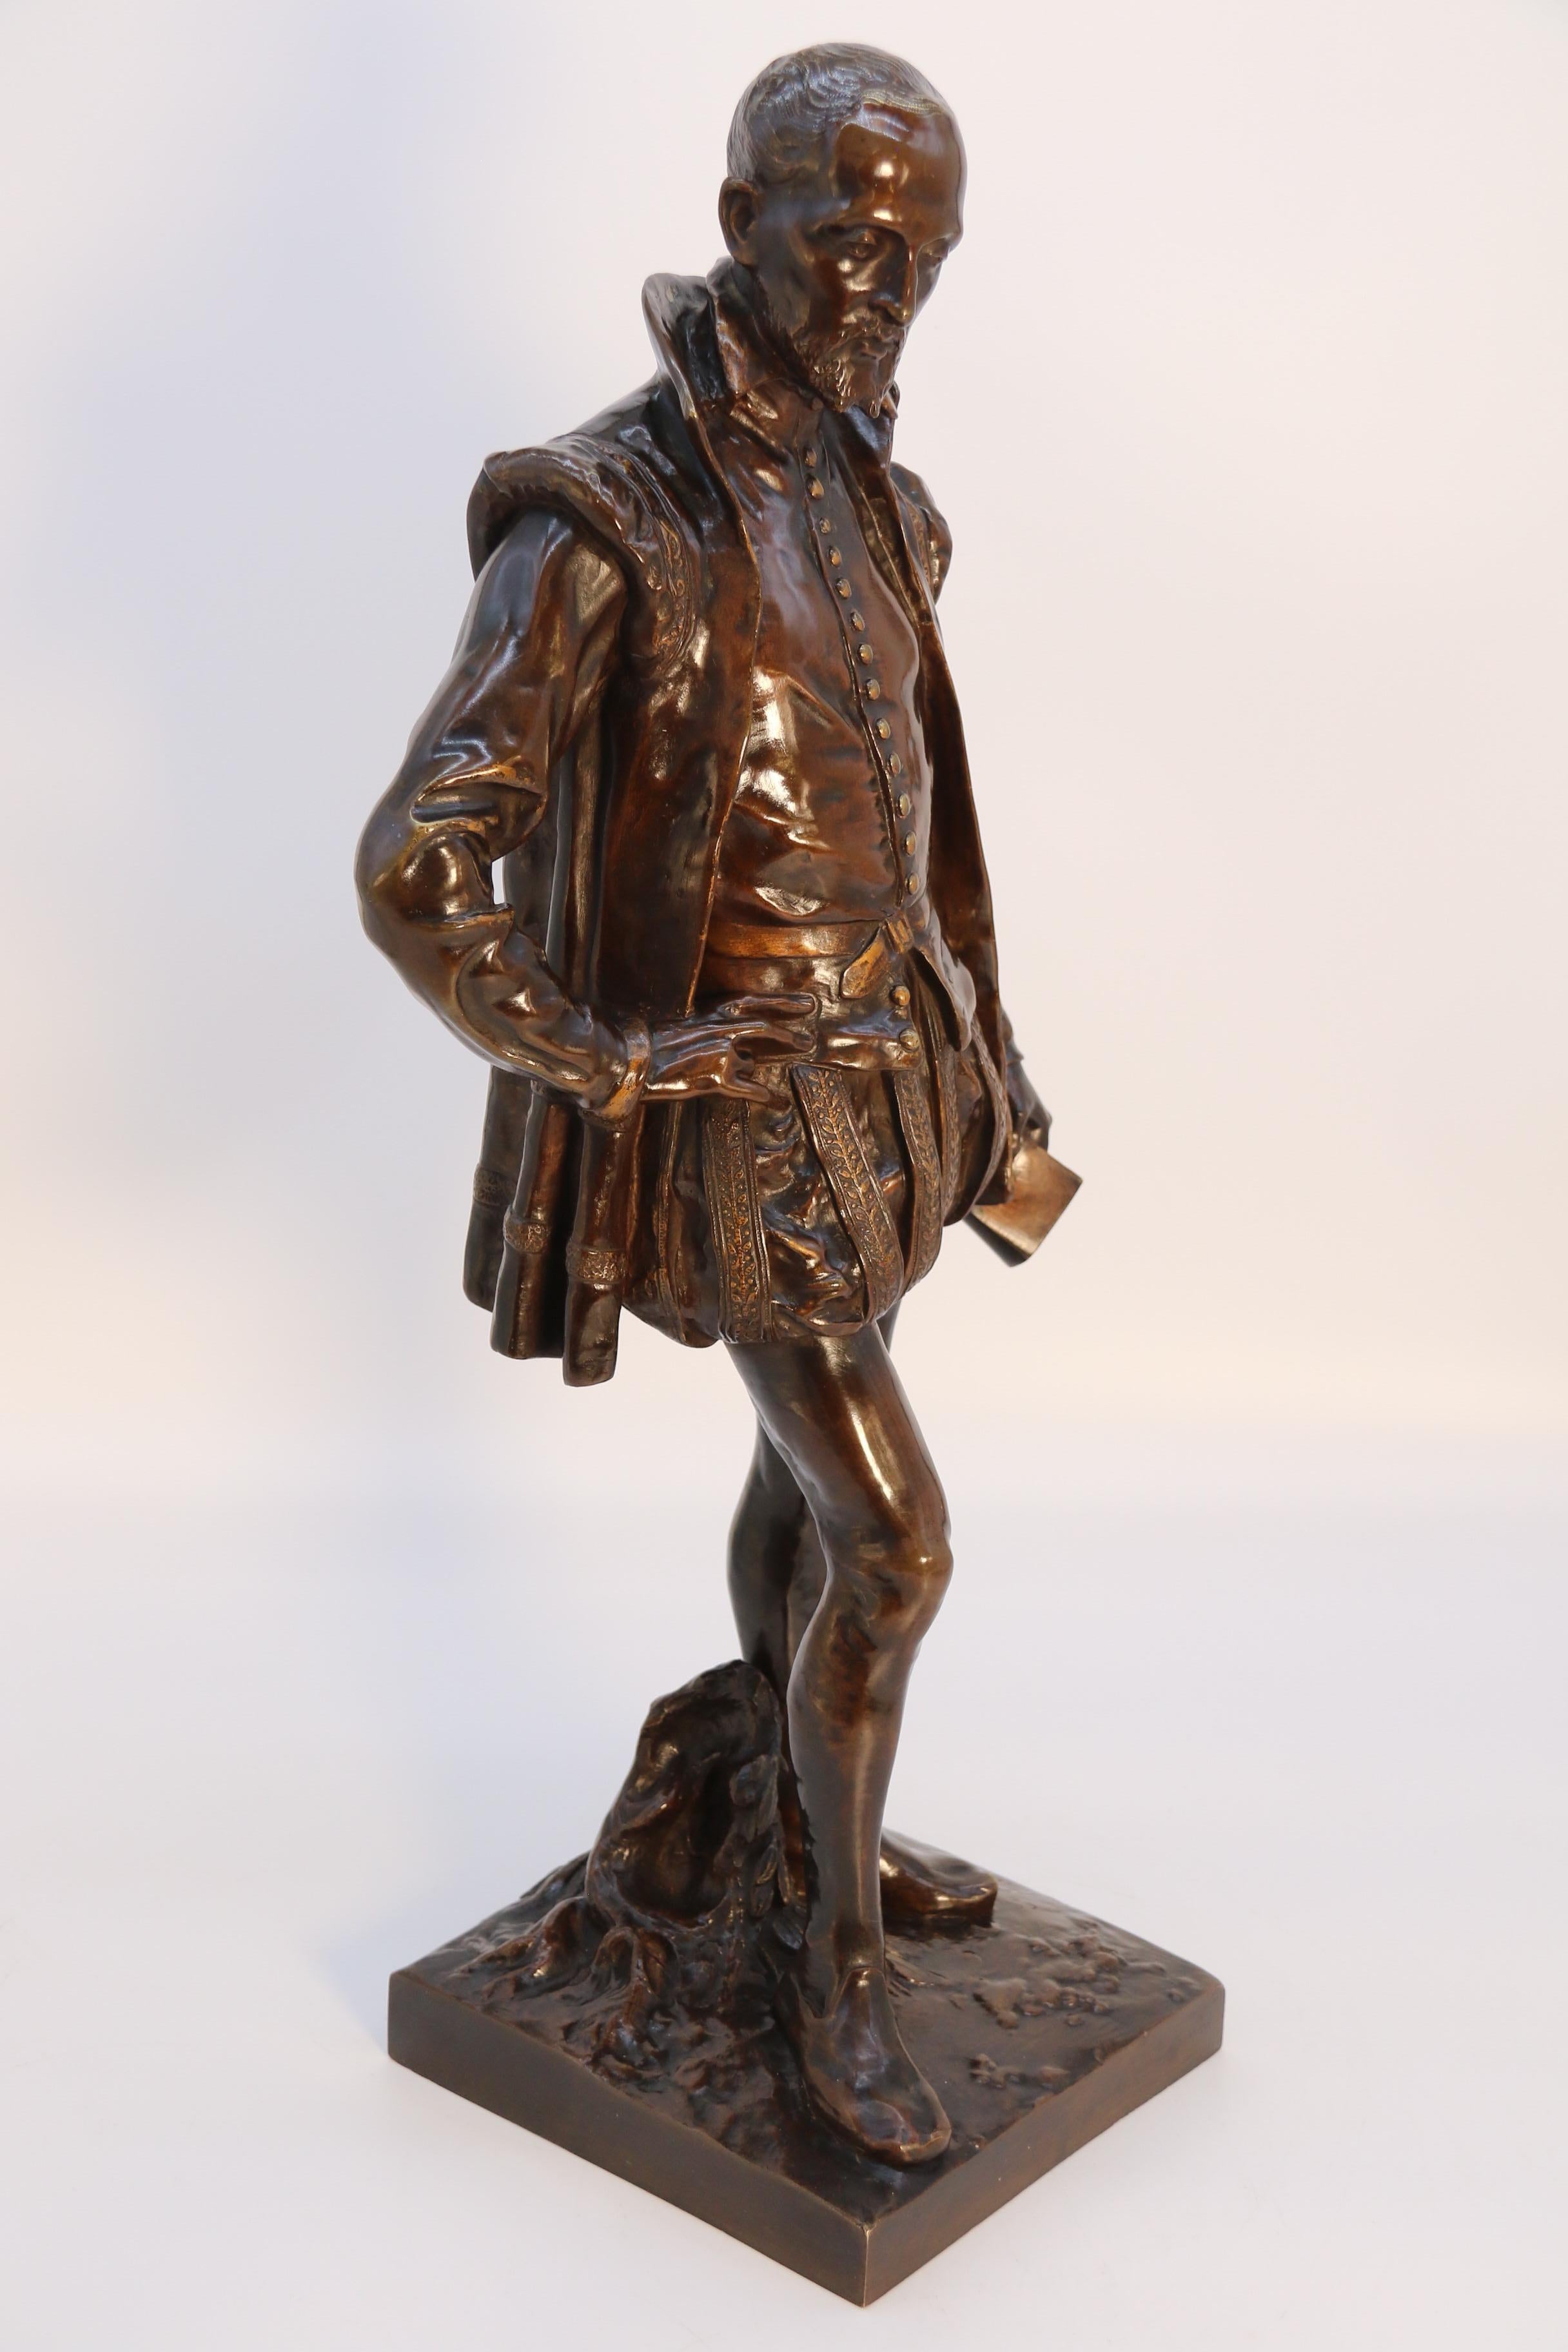 The 19th century bronze study of the French poet Joachim de Bellay by L Adolphe en vente 2